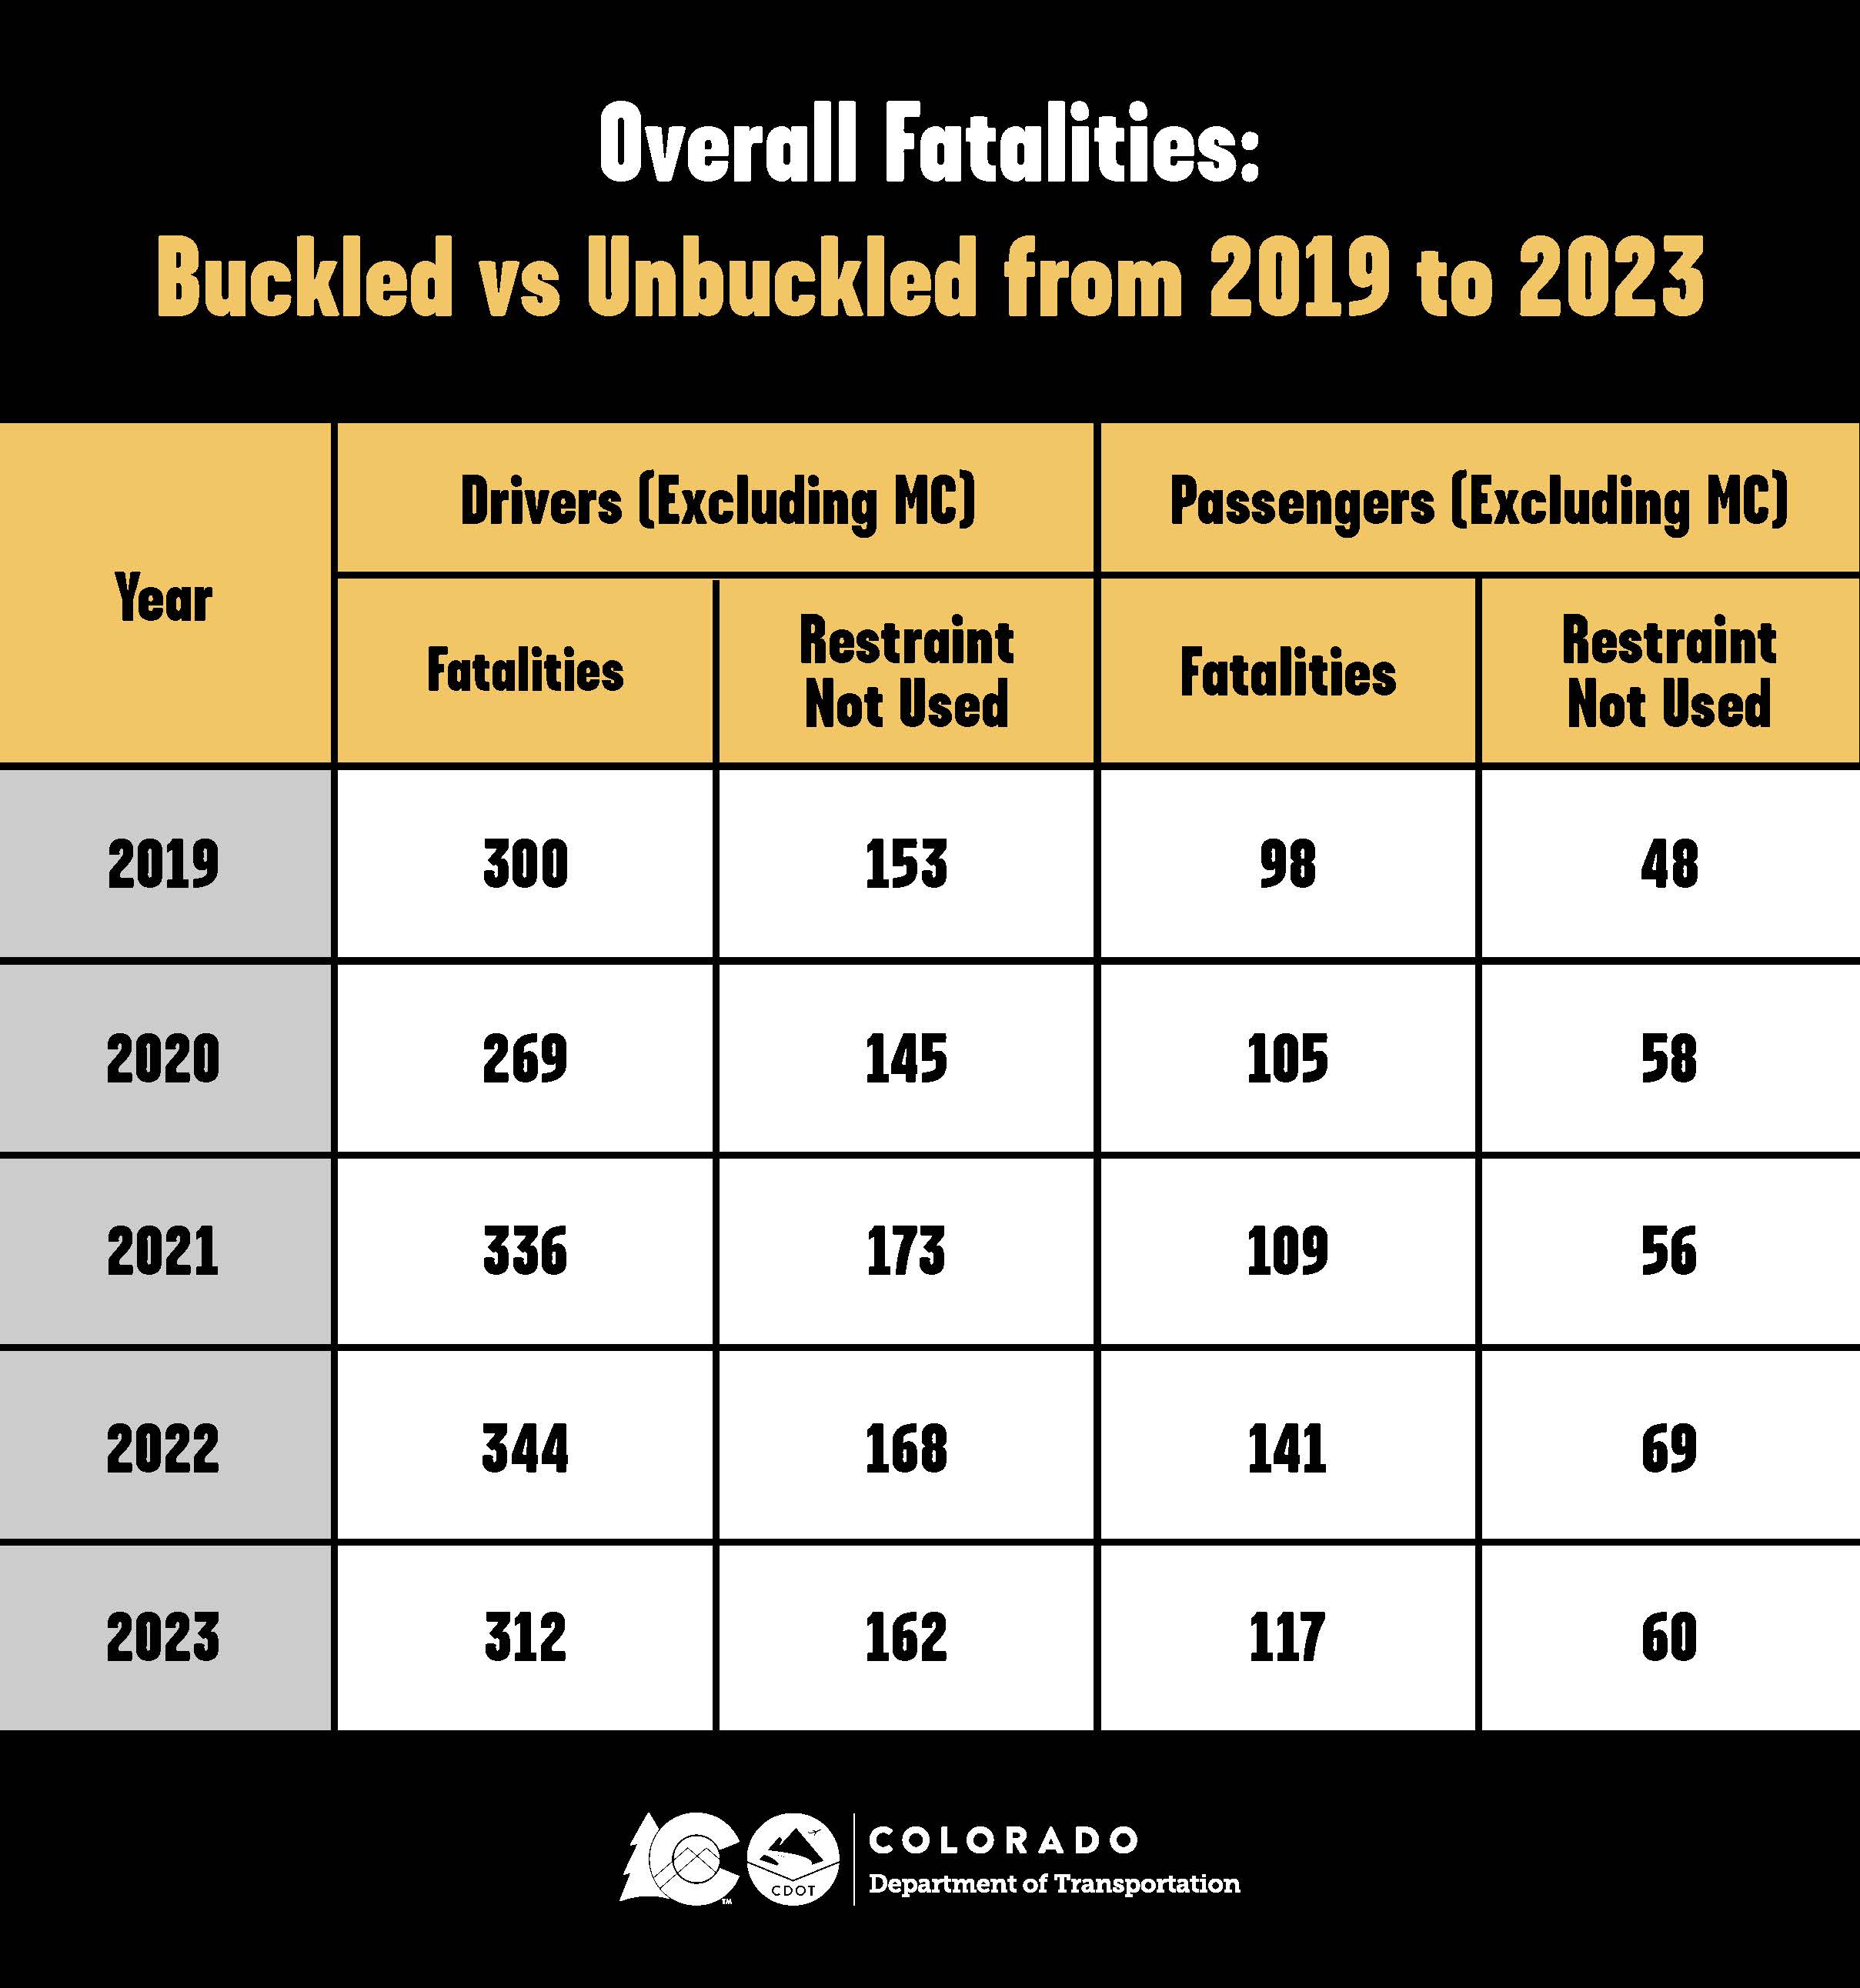 Overall Fatalities: Buckled vs Unbuckled from 2019 to 2023 detail image